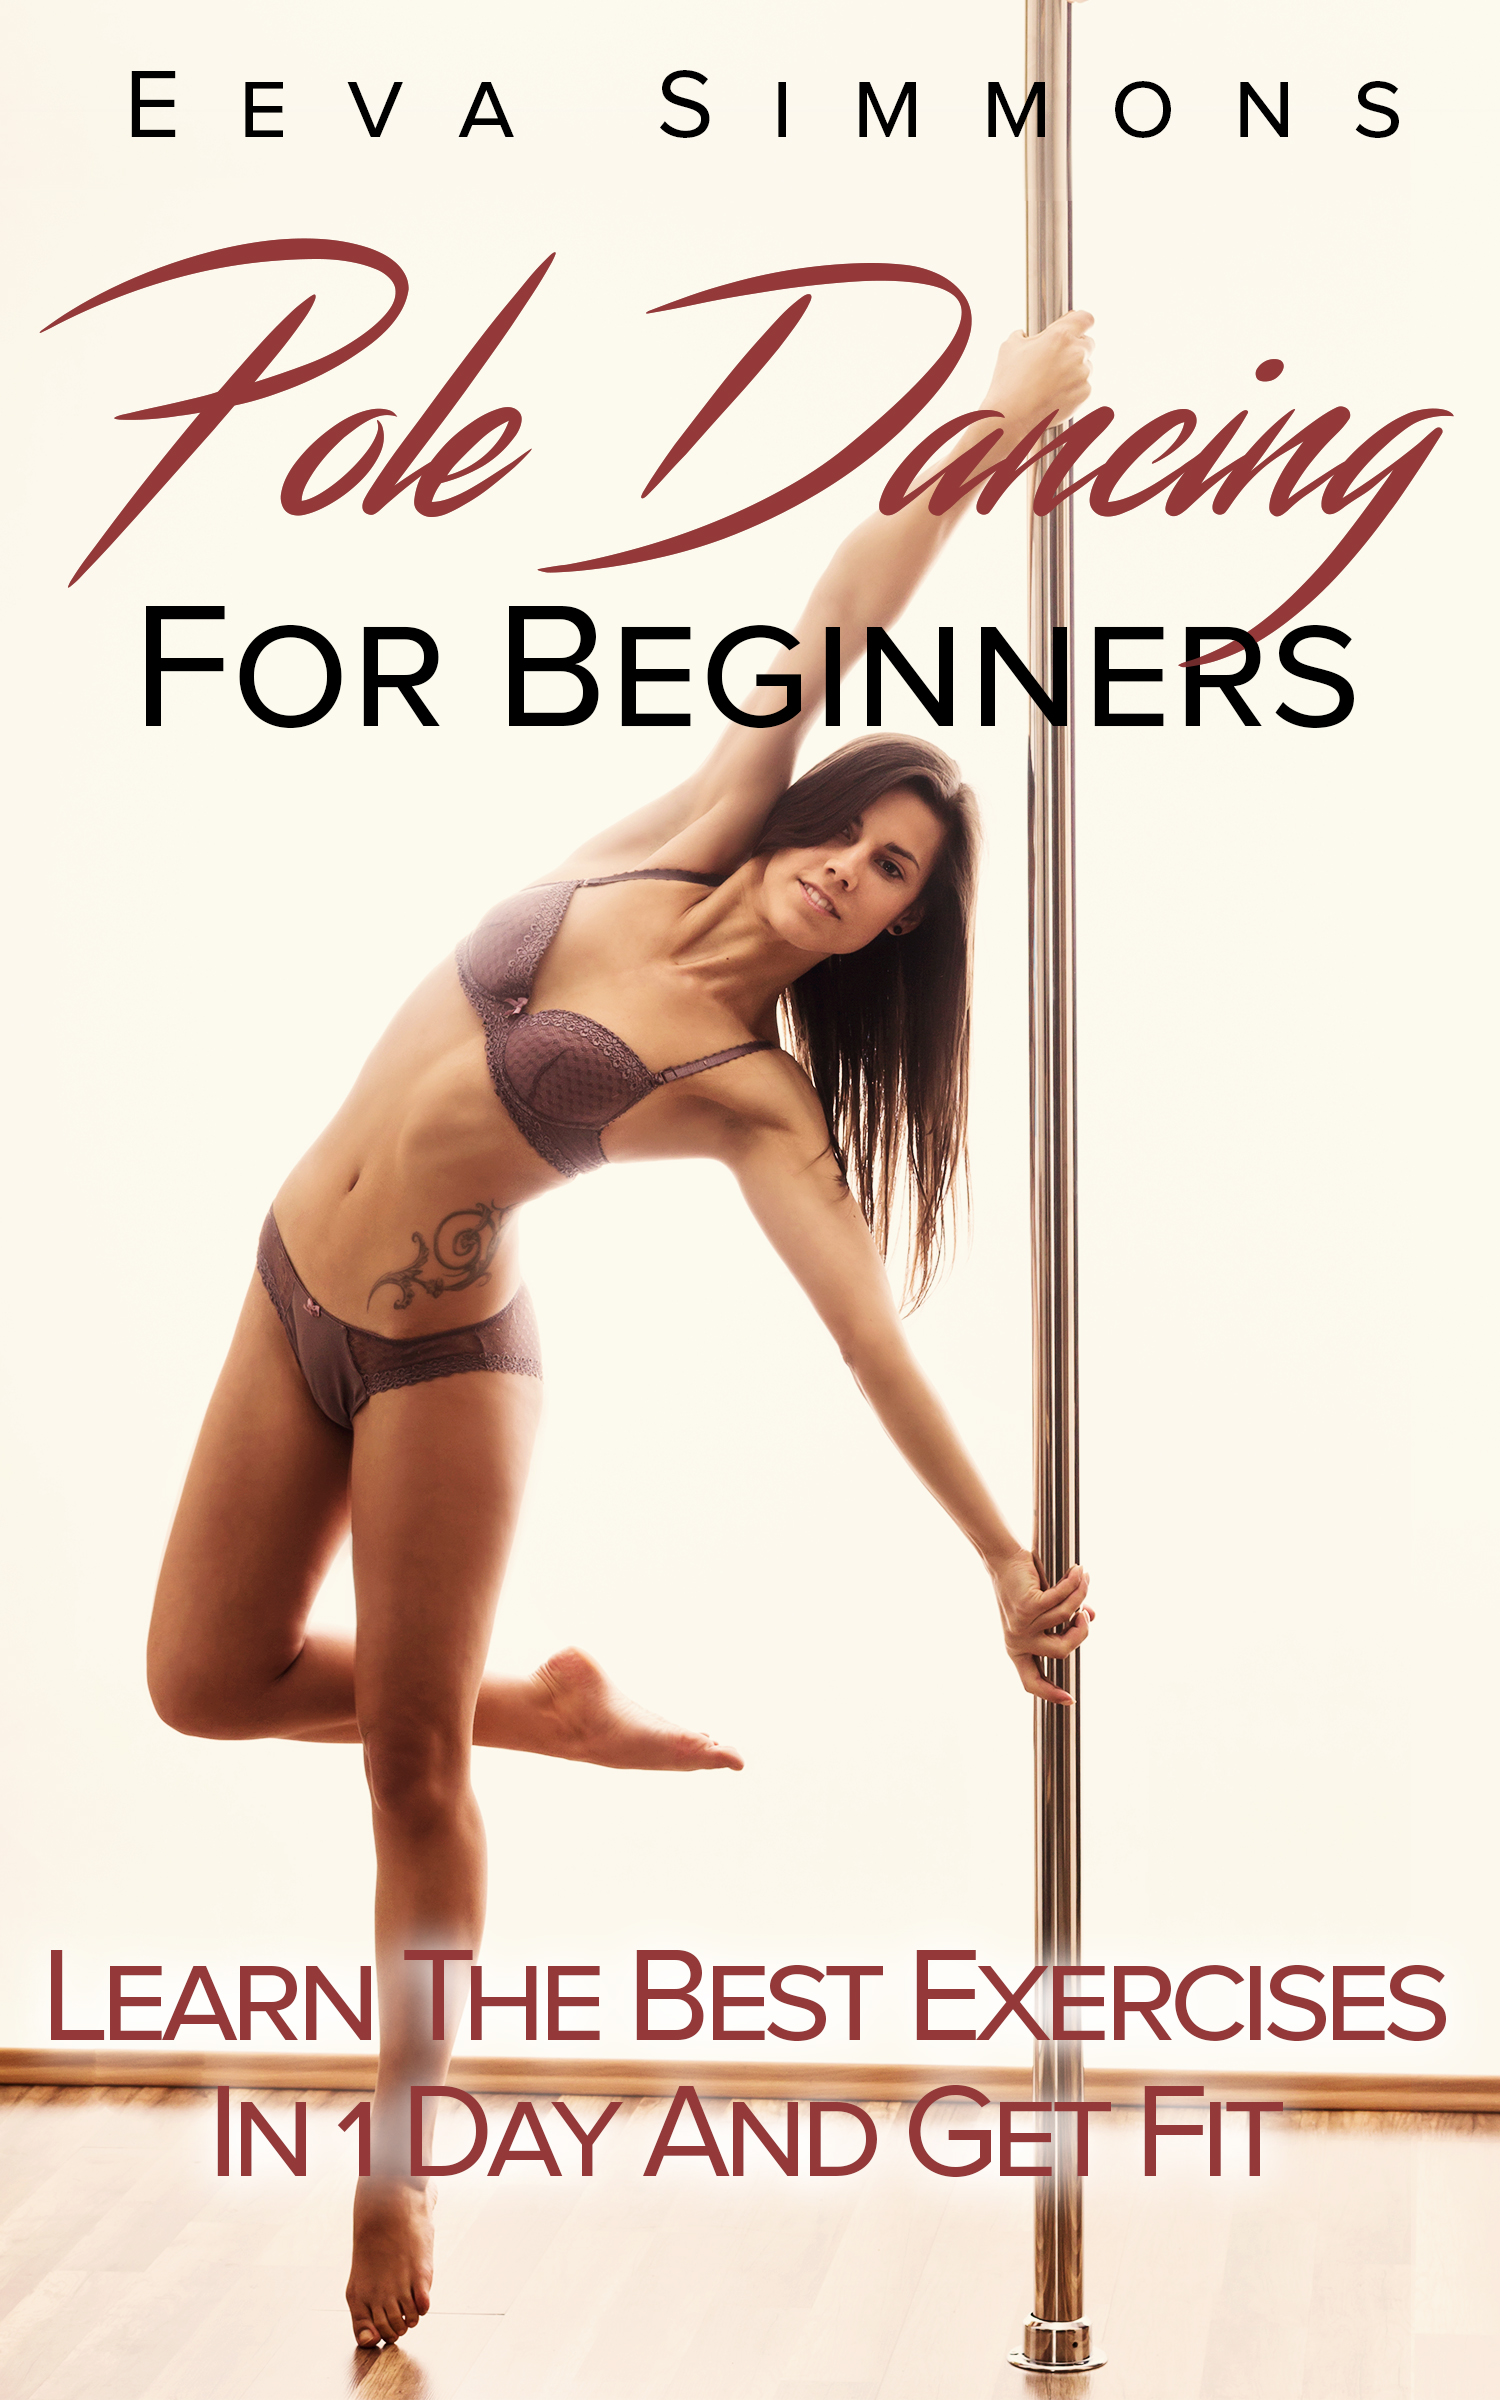 FREE: Pole Dancing For Beginners: Learn The Best Exercises In 1 Day And Get Fit by Eeva Simmons